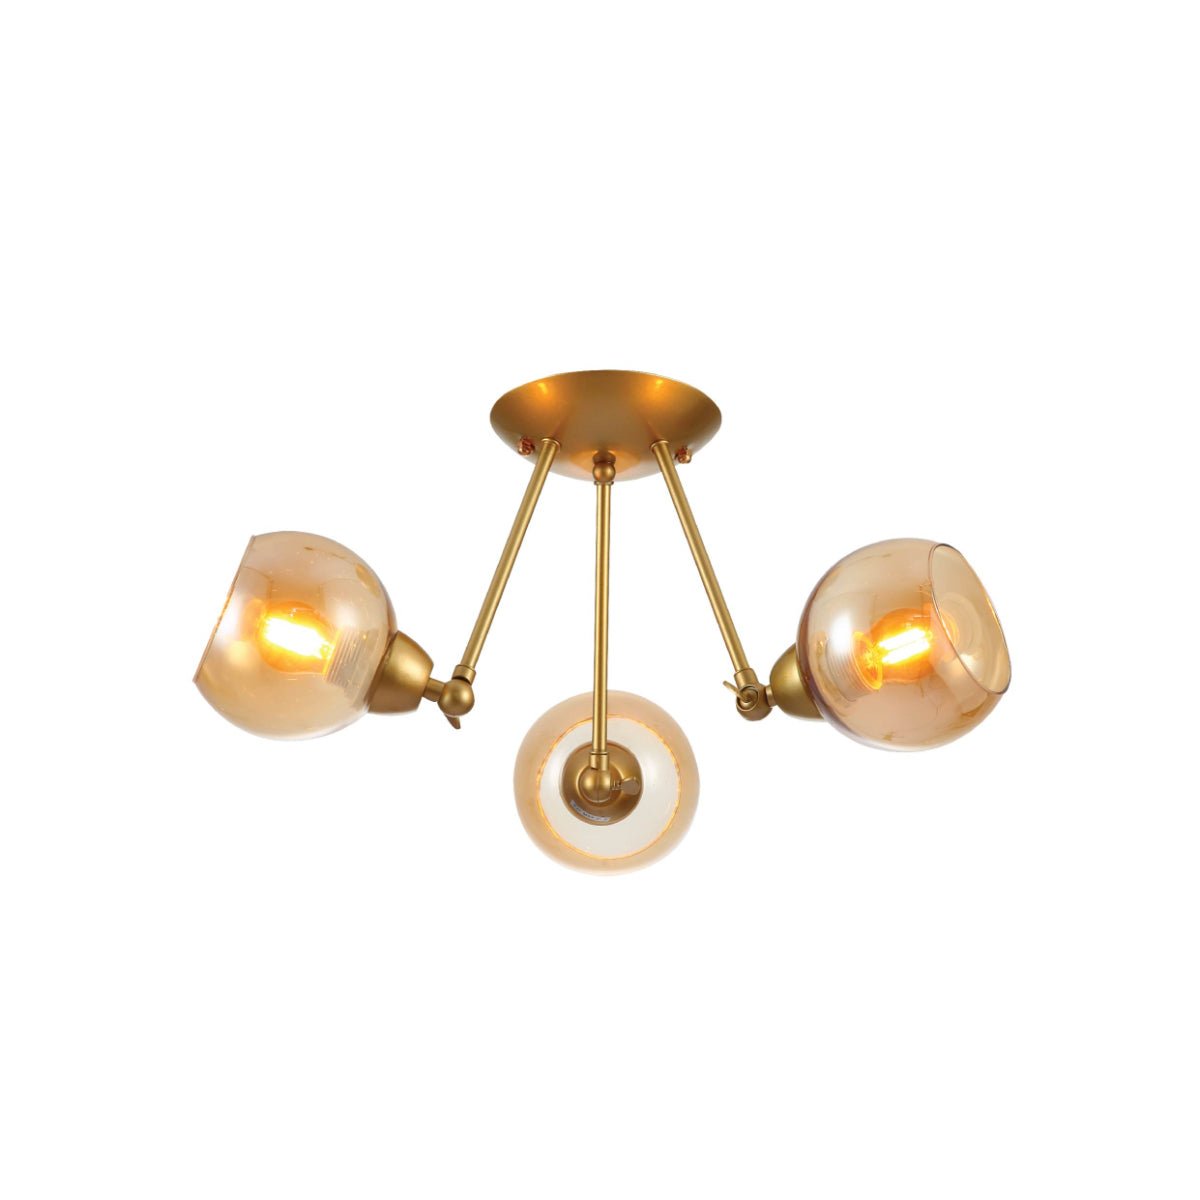 Main image of Gold Hinged Metal Amber Dome Glass Ceiling Light with E27 Fittings | TEKLED 159-17648